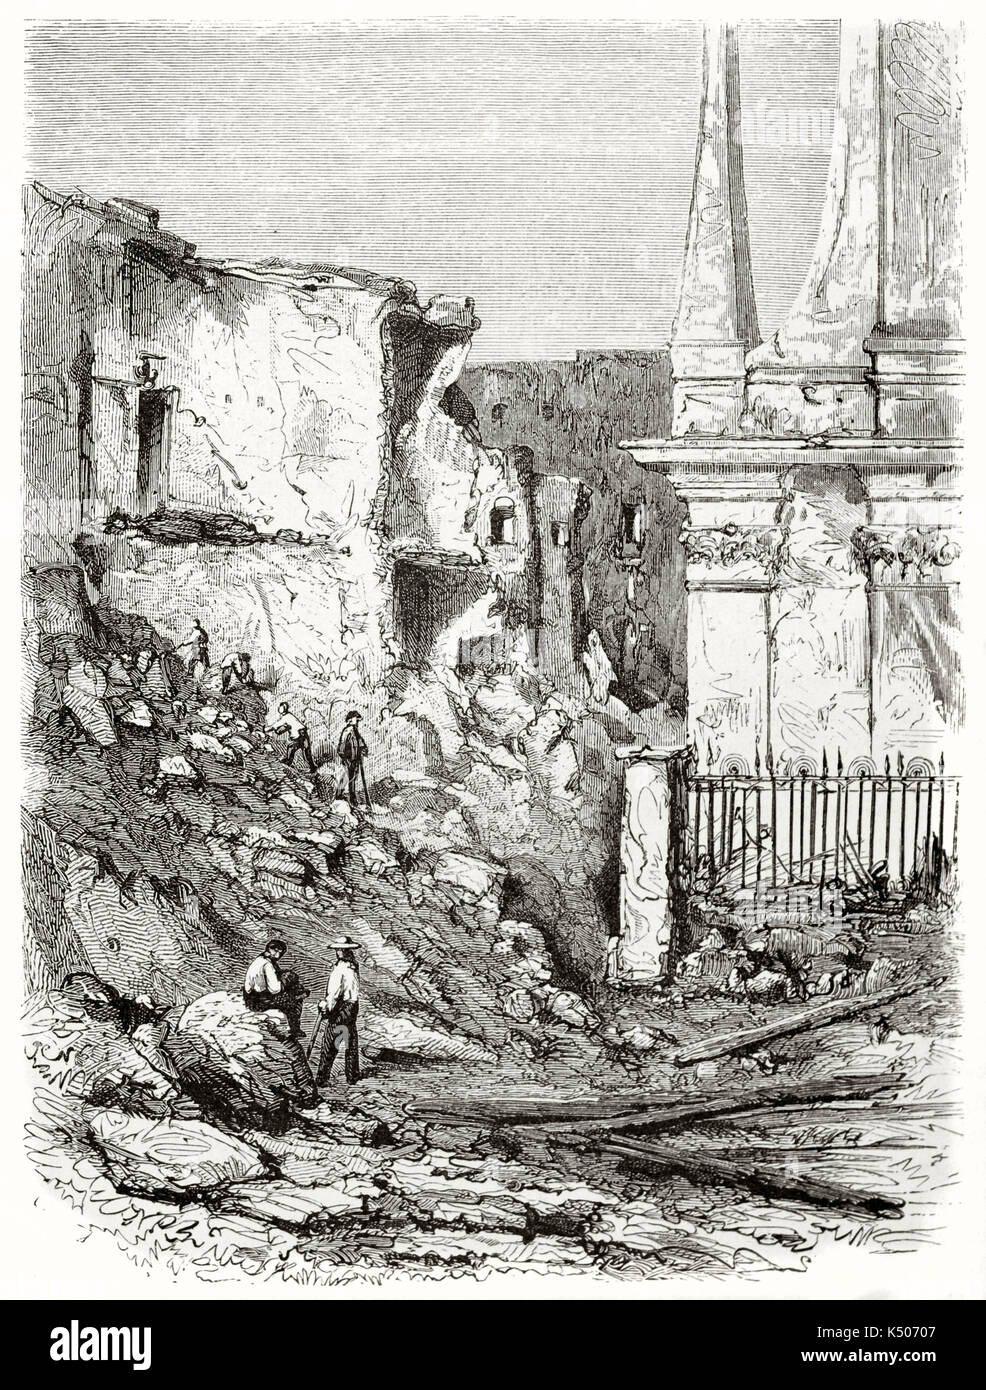 Ancient buildings ruins with people climbing on it. Ruins in Torre del Greco Italy after Vesuvius eruption and overflowing in 1861. By Riou published on Le Tour du Monde Paris 1862 Stock Photo